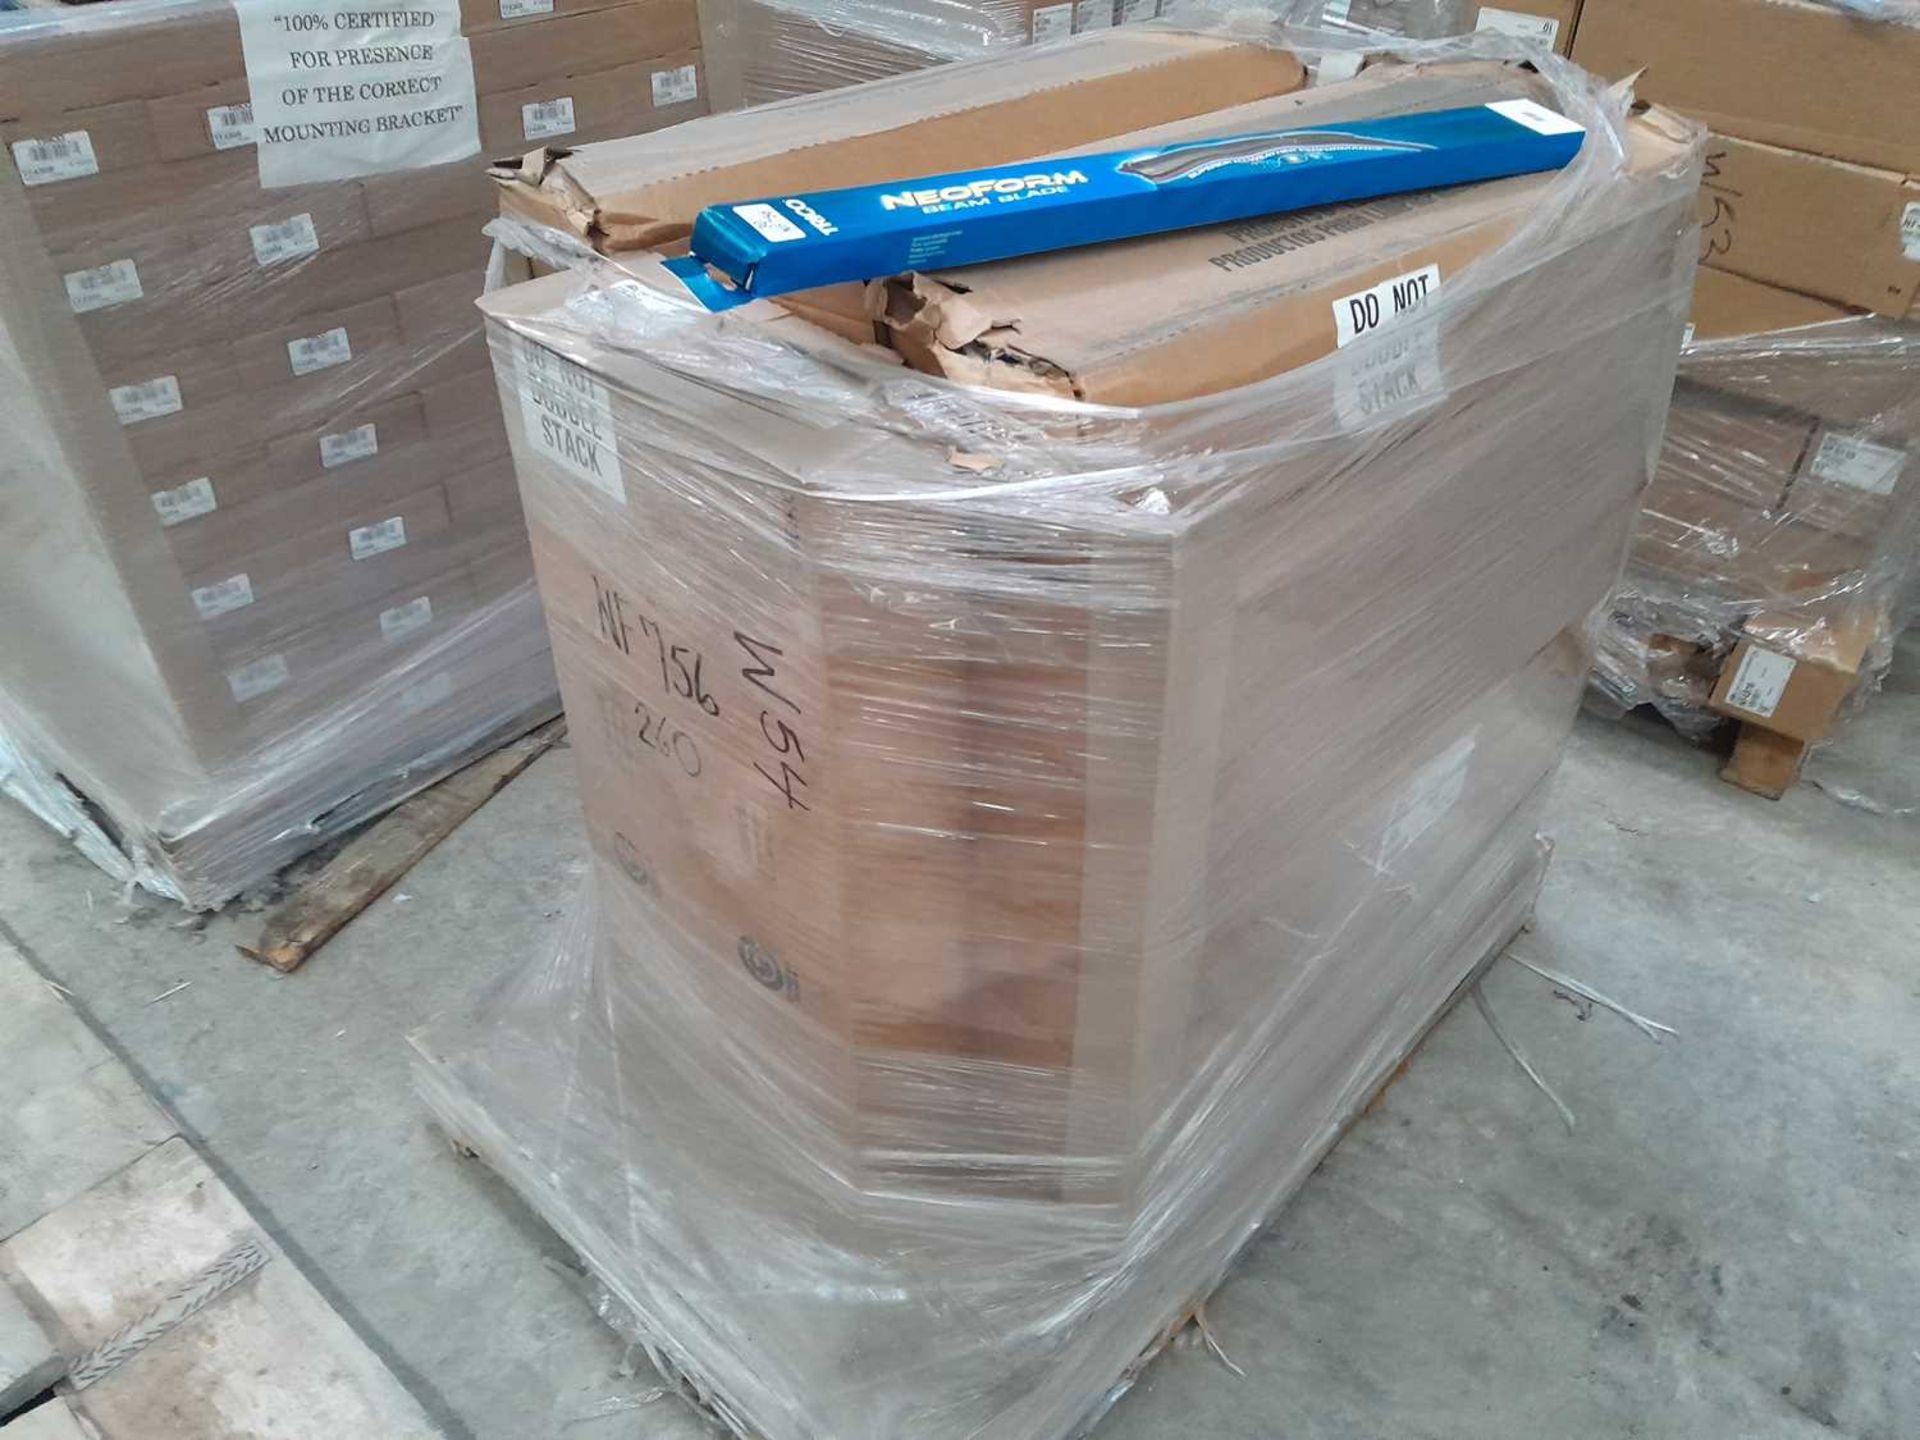 Unused Pallet of Trico NF756 Windscreen Wipers (30") - Image 3 of 3